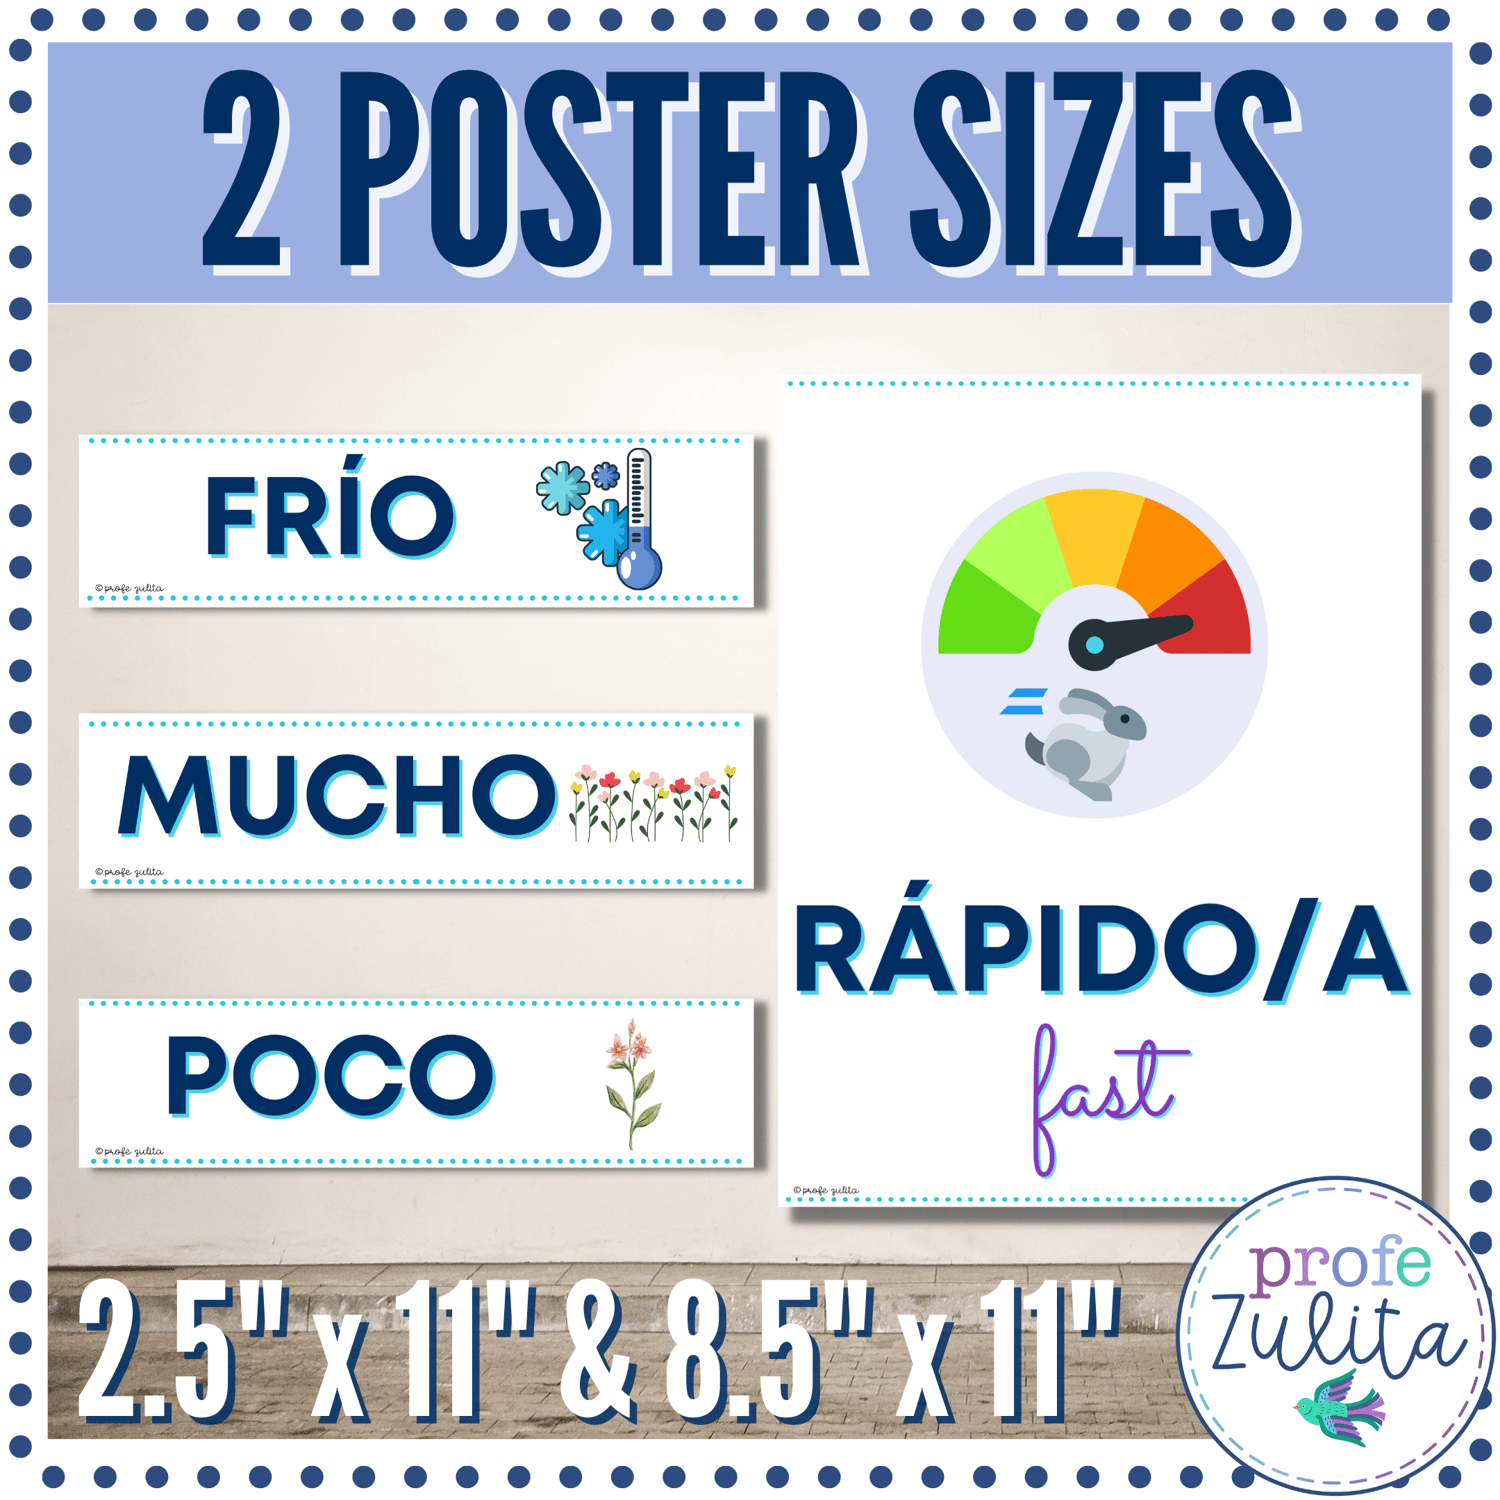 31 Spanish Adjectives Word Wall Posters - 2 Sizes